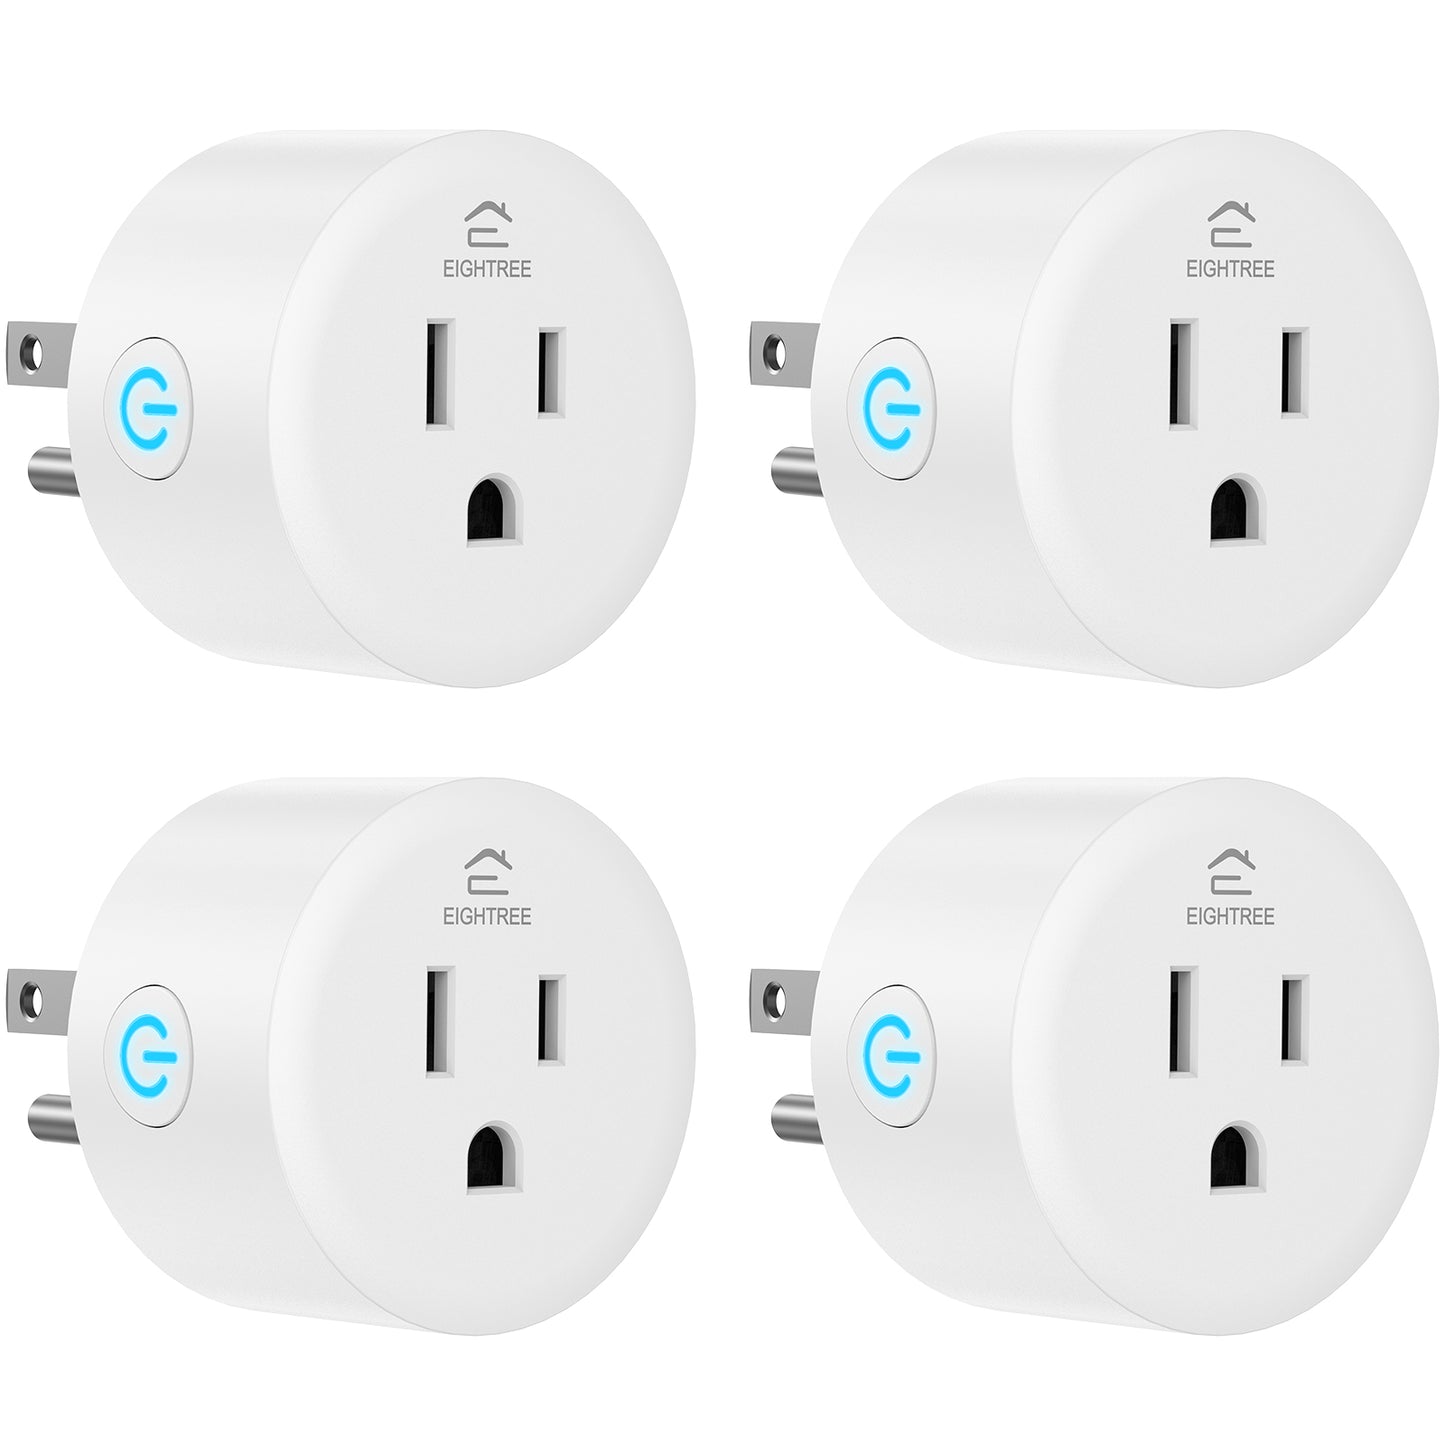 Smart Plug EIGHTREE, Alexa Smart Plugs That Work with Alexa and Google Home, Compatible with SmartThings, Smart Outlet with WiFi Remote Control and Ti